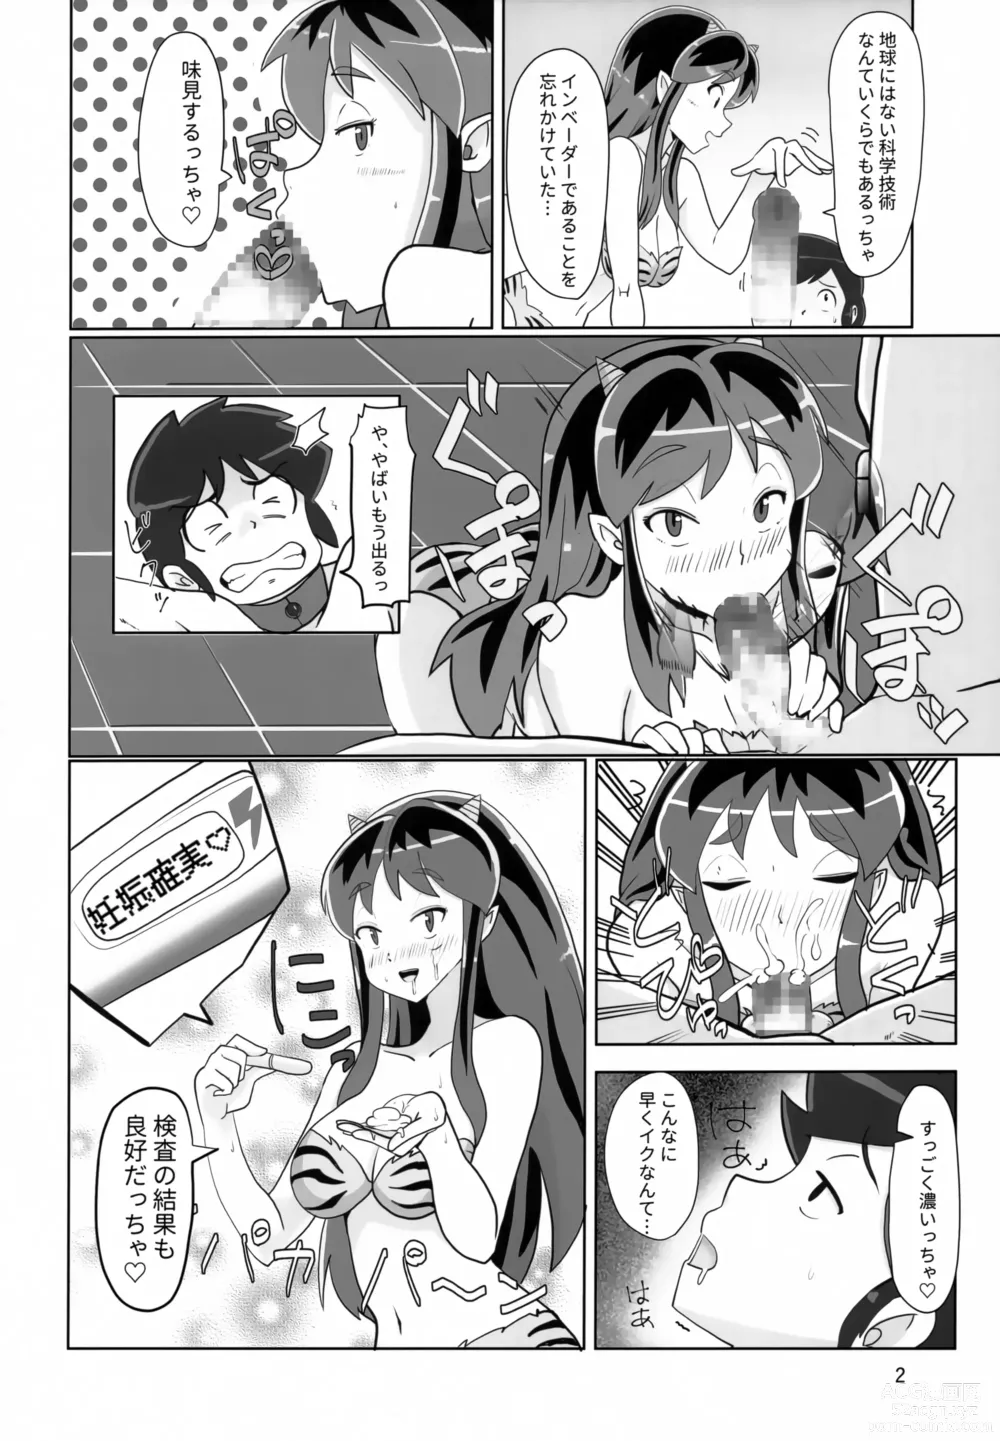 Page 3 of doujinshi Dont fidget too much